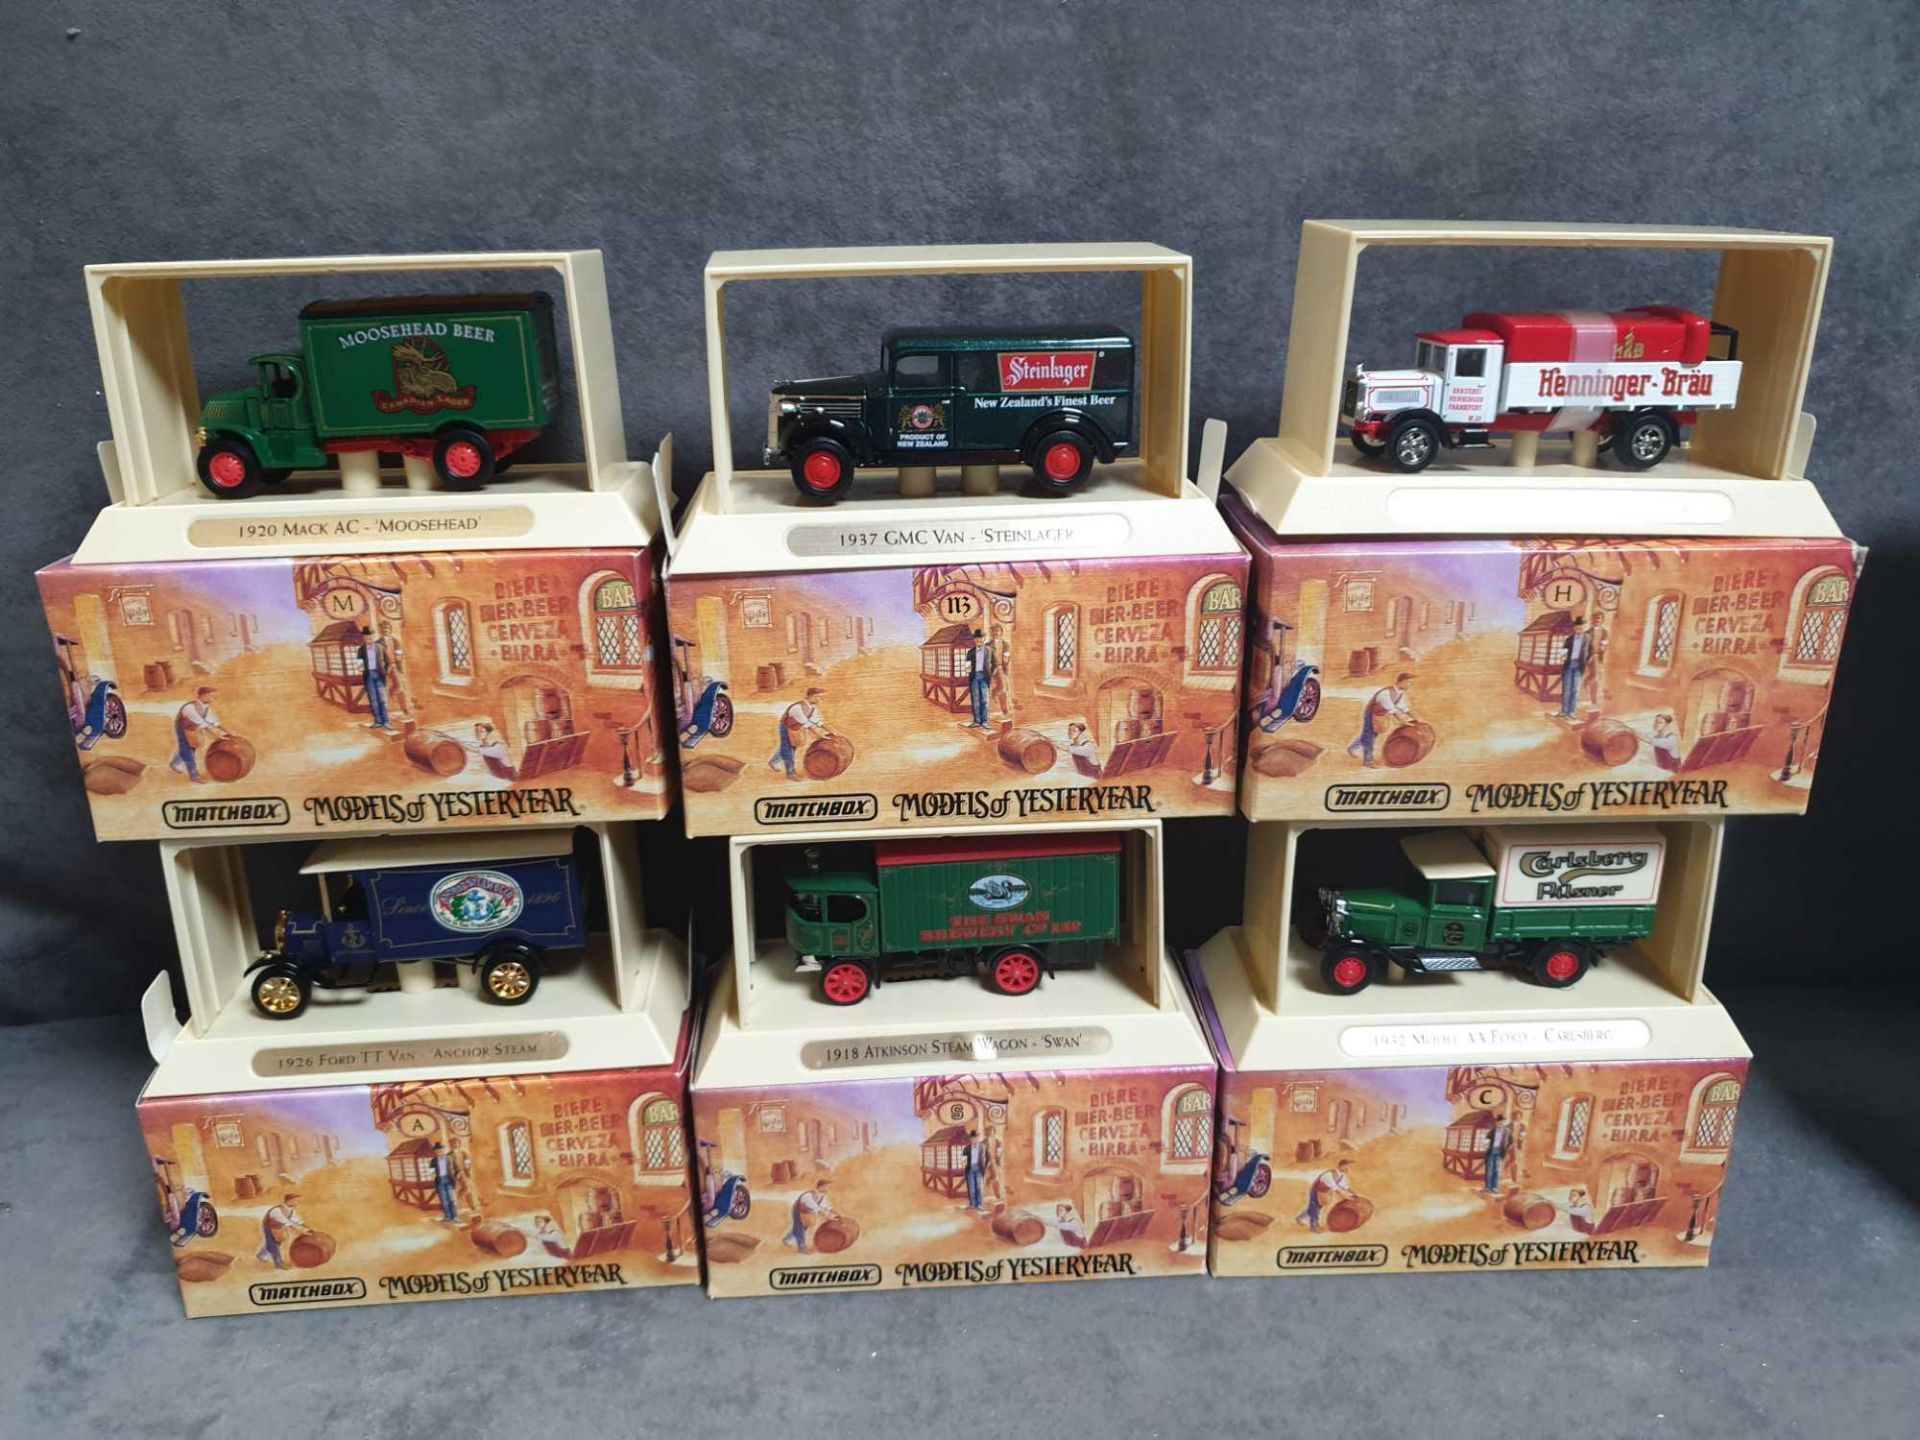 6 X Matchbox Diecast Vehicles Models Of Yesteryear Comprising #YGB08 Great Beers Of The World